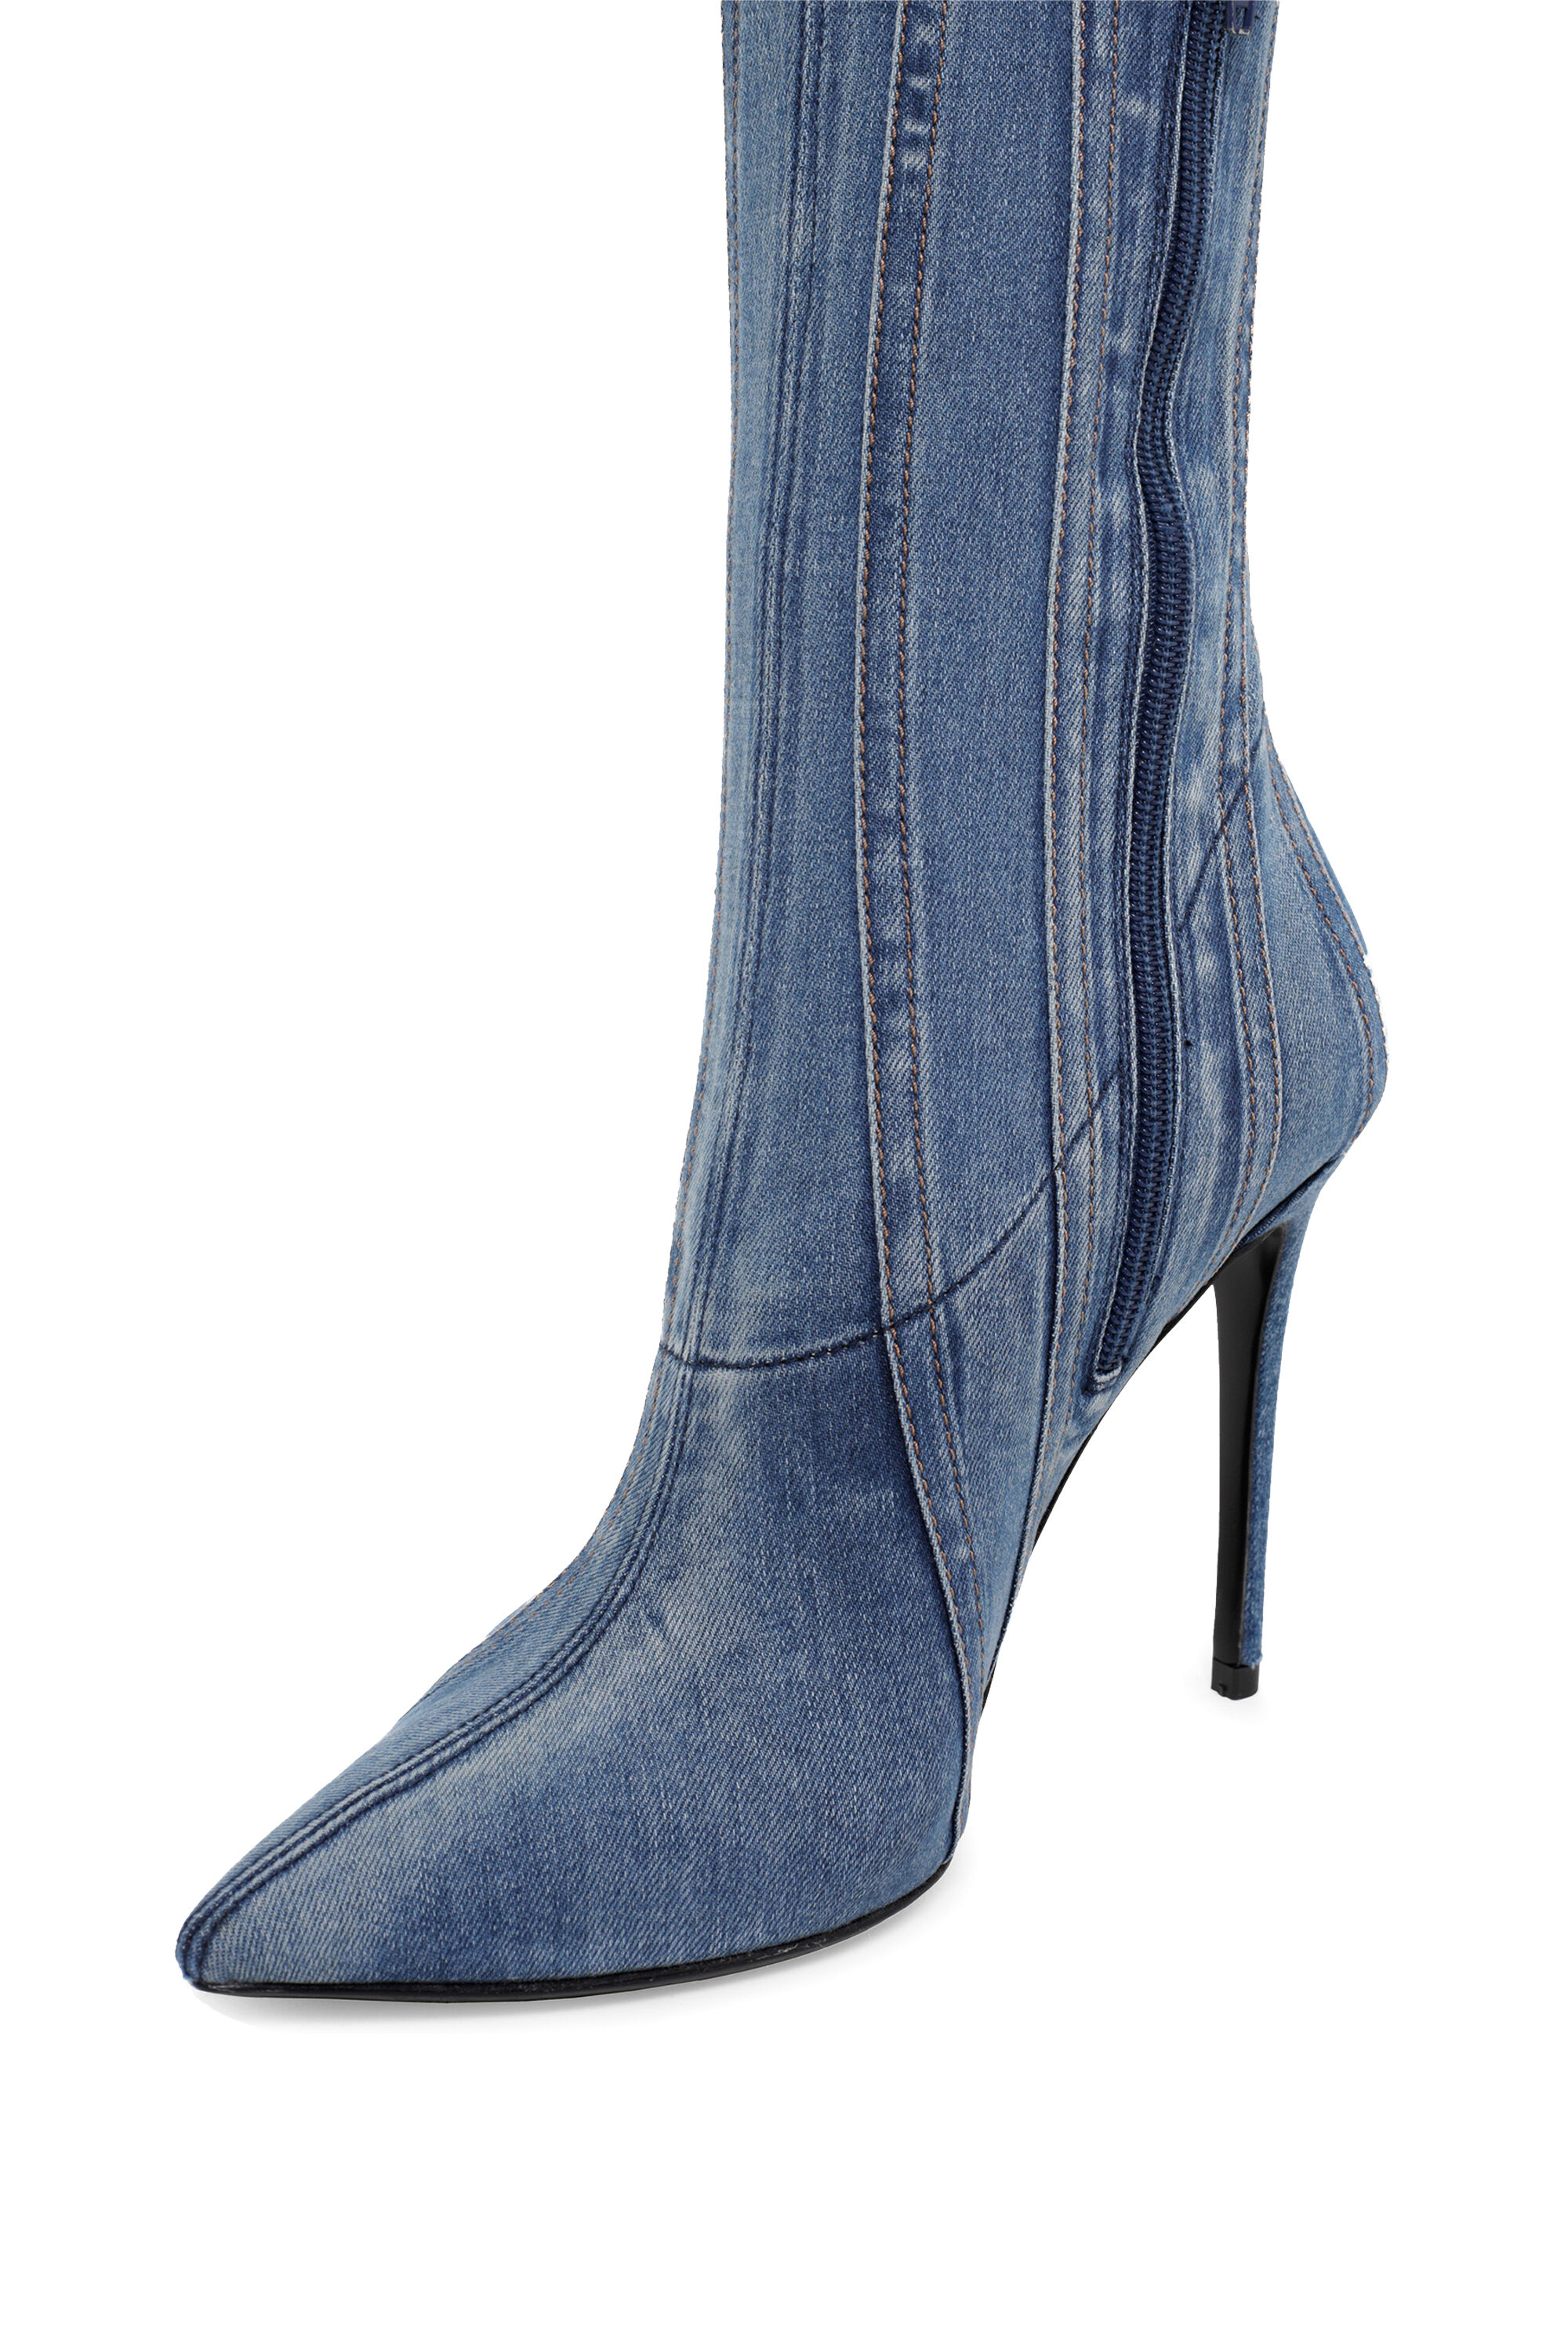 Diesel - D-YUCCA OTK, Woman D-Yucca Otk - Over-the-knee boots in denim in Blue - Image 5